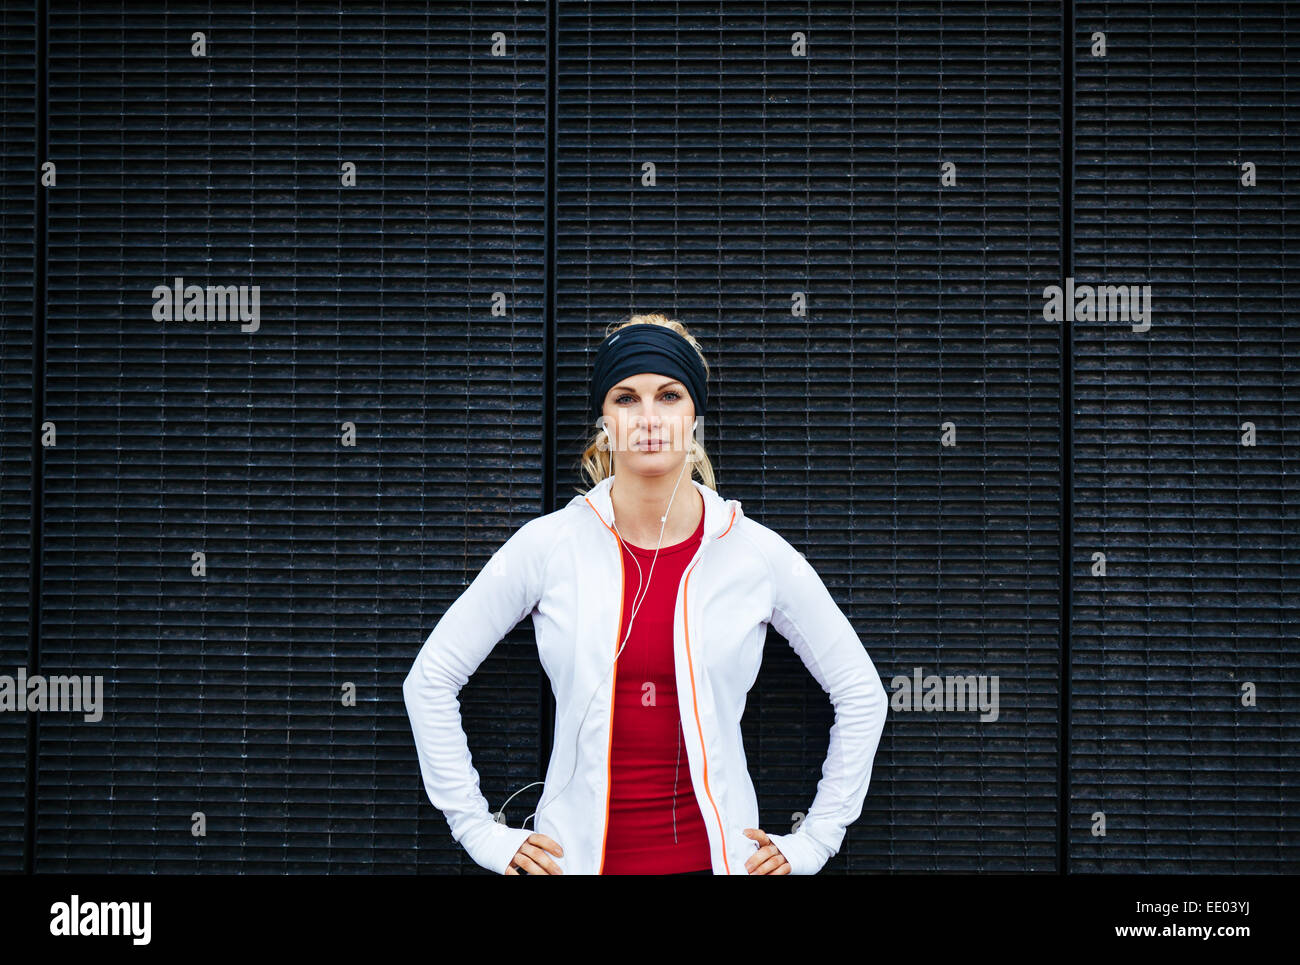 Close up portrait determined female runner stretching arms stock photo